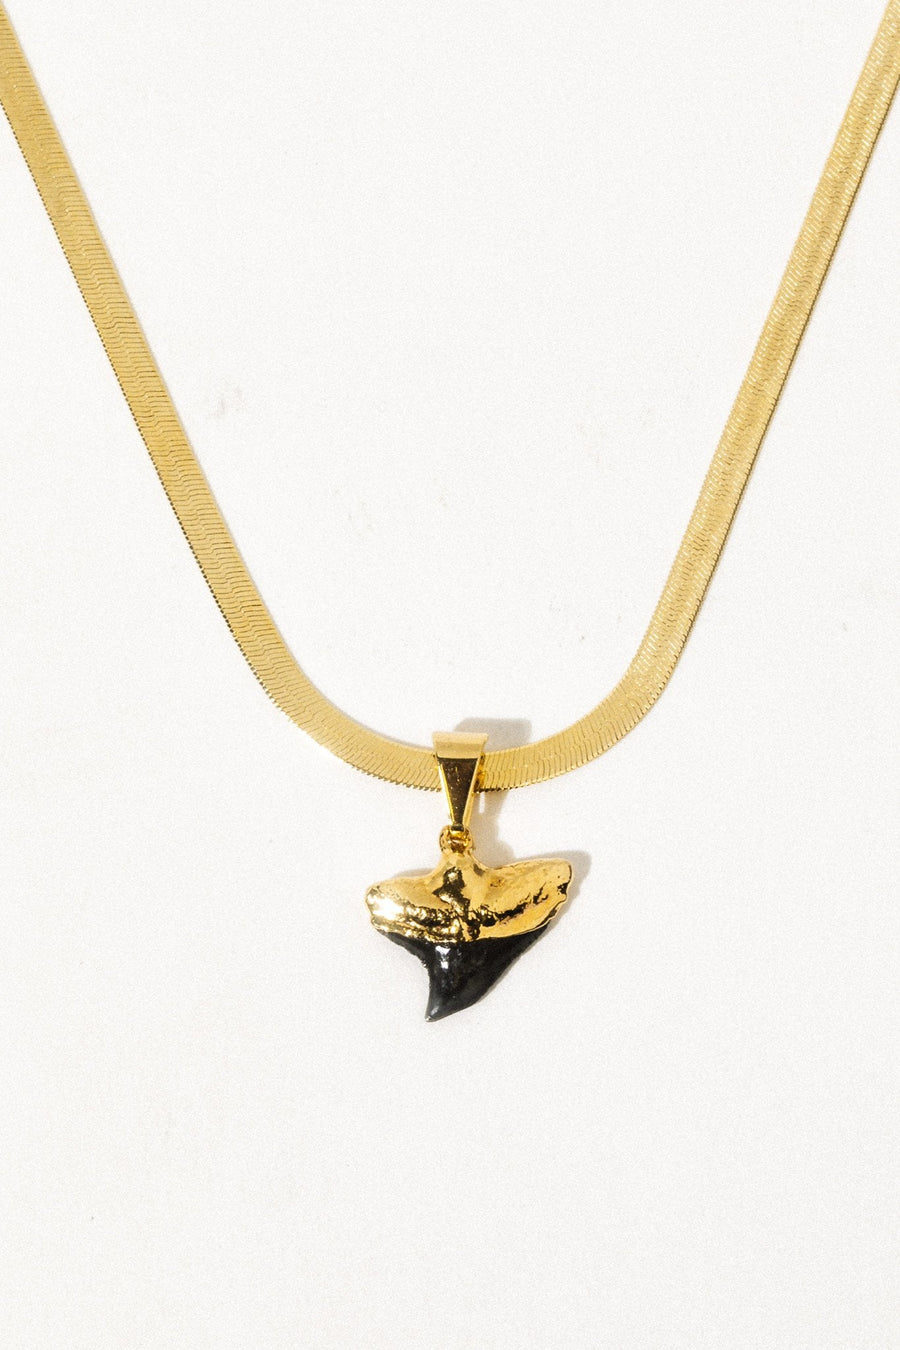 Dona Italia Jewelry Gold / 14 Inches Gold Coast Shark Tooth Necklace